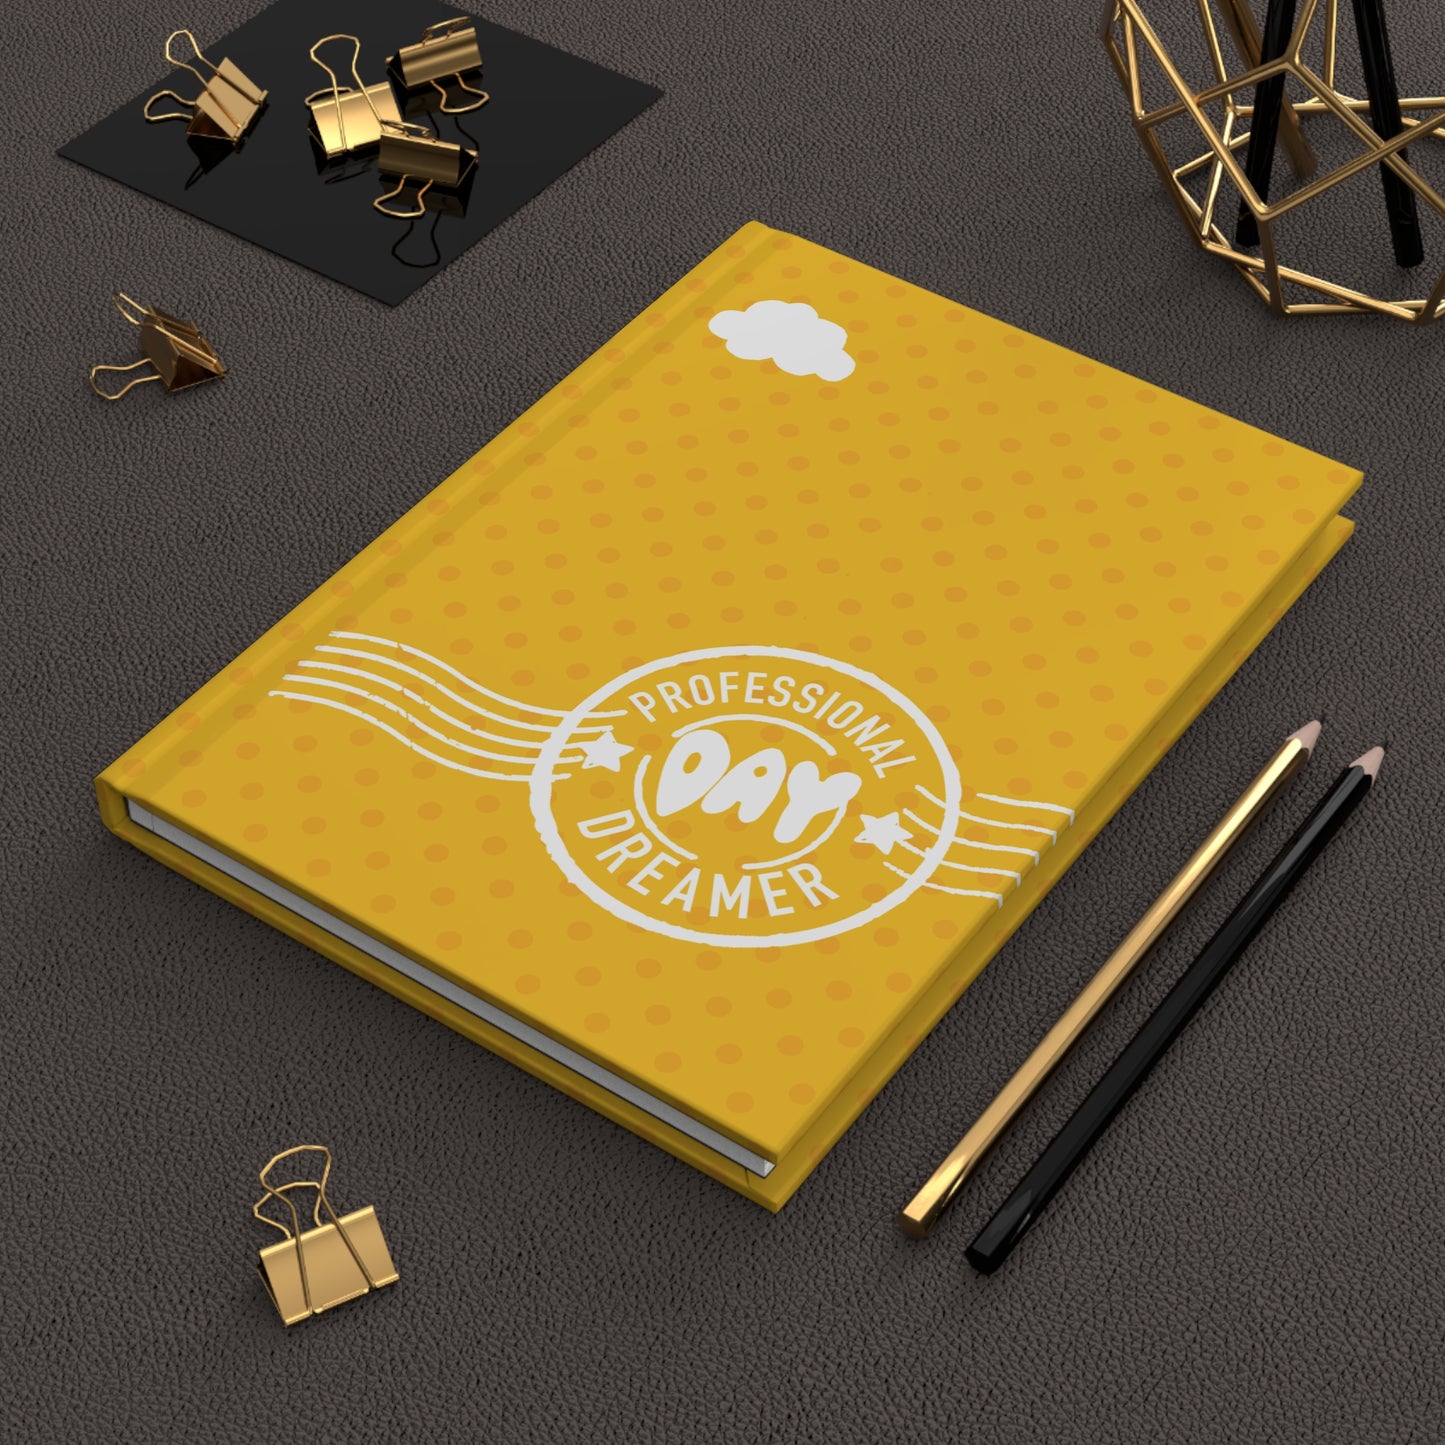 The Professional Day Dreamers Club Hardcover Yellow Notebook